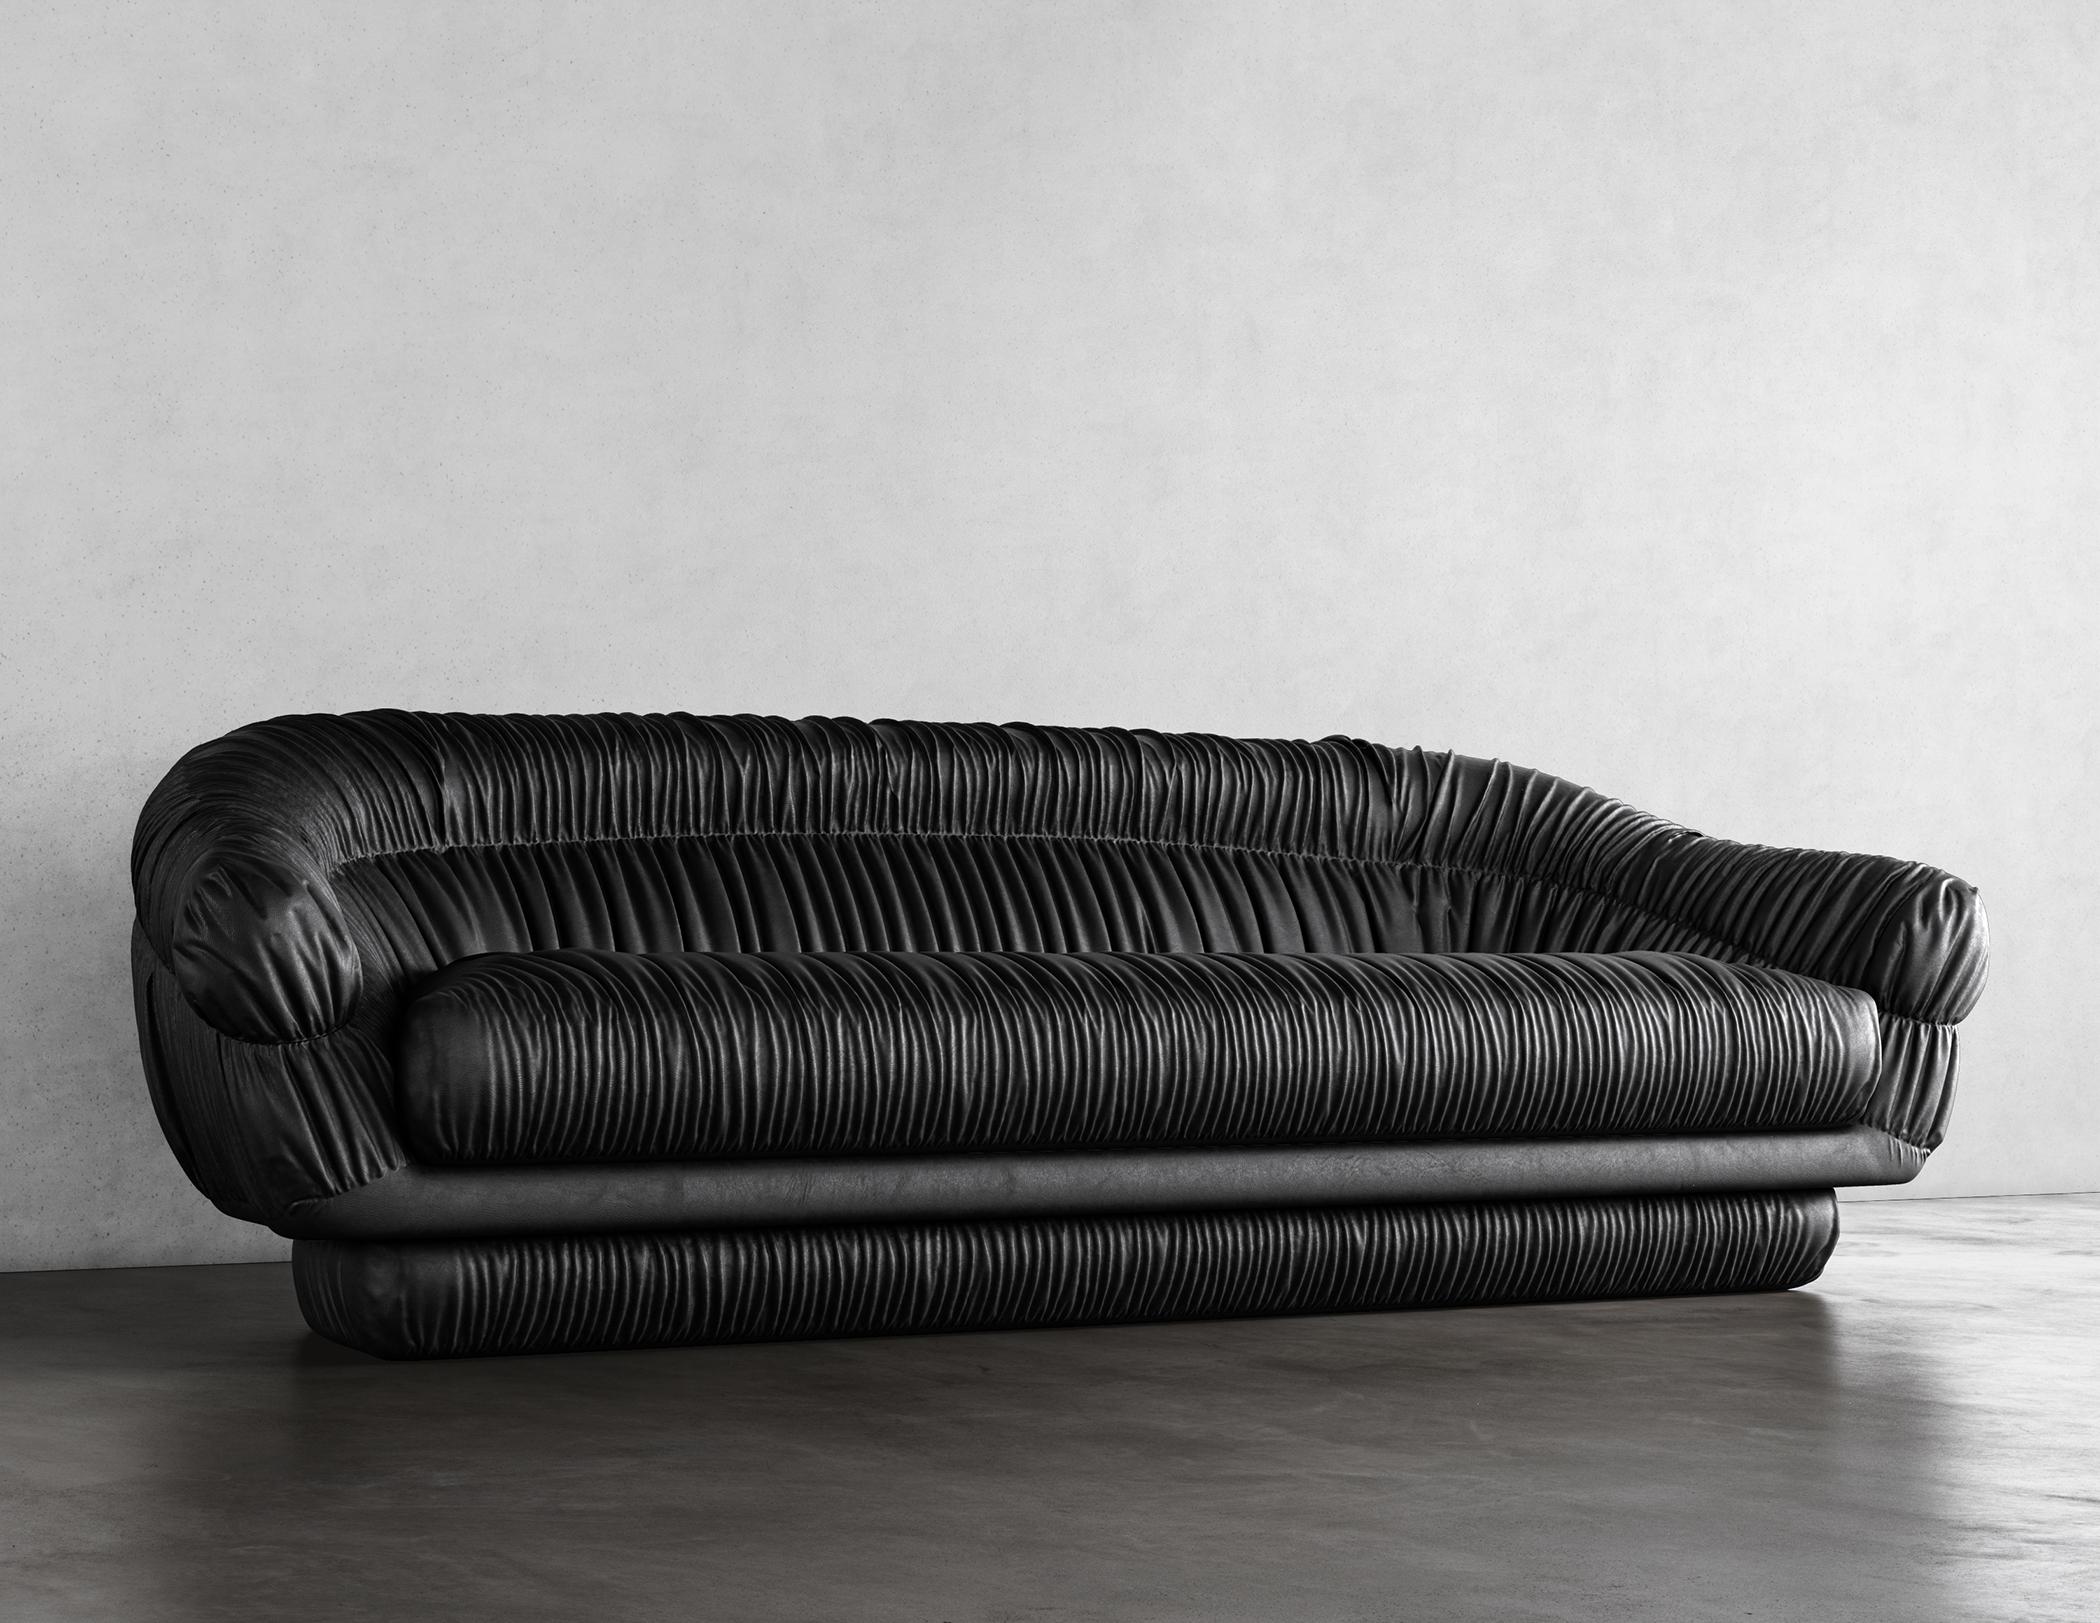 SWERVE SOFA - Modern Sofa in Black Faux Lambskin

The Swerve Sofa with black faux lambskin upholstery and modern ruched design is a stylish and comfortable piece of furniture that will add a touch of elegance to any living space. The sofa features a